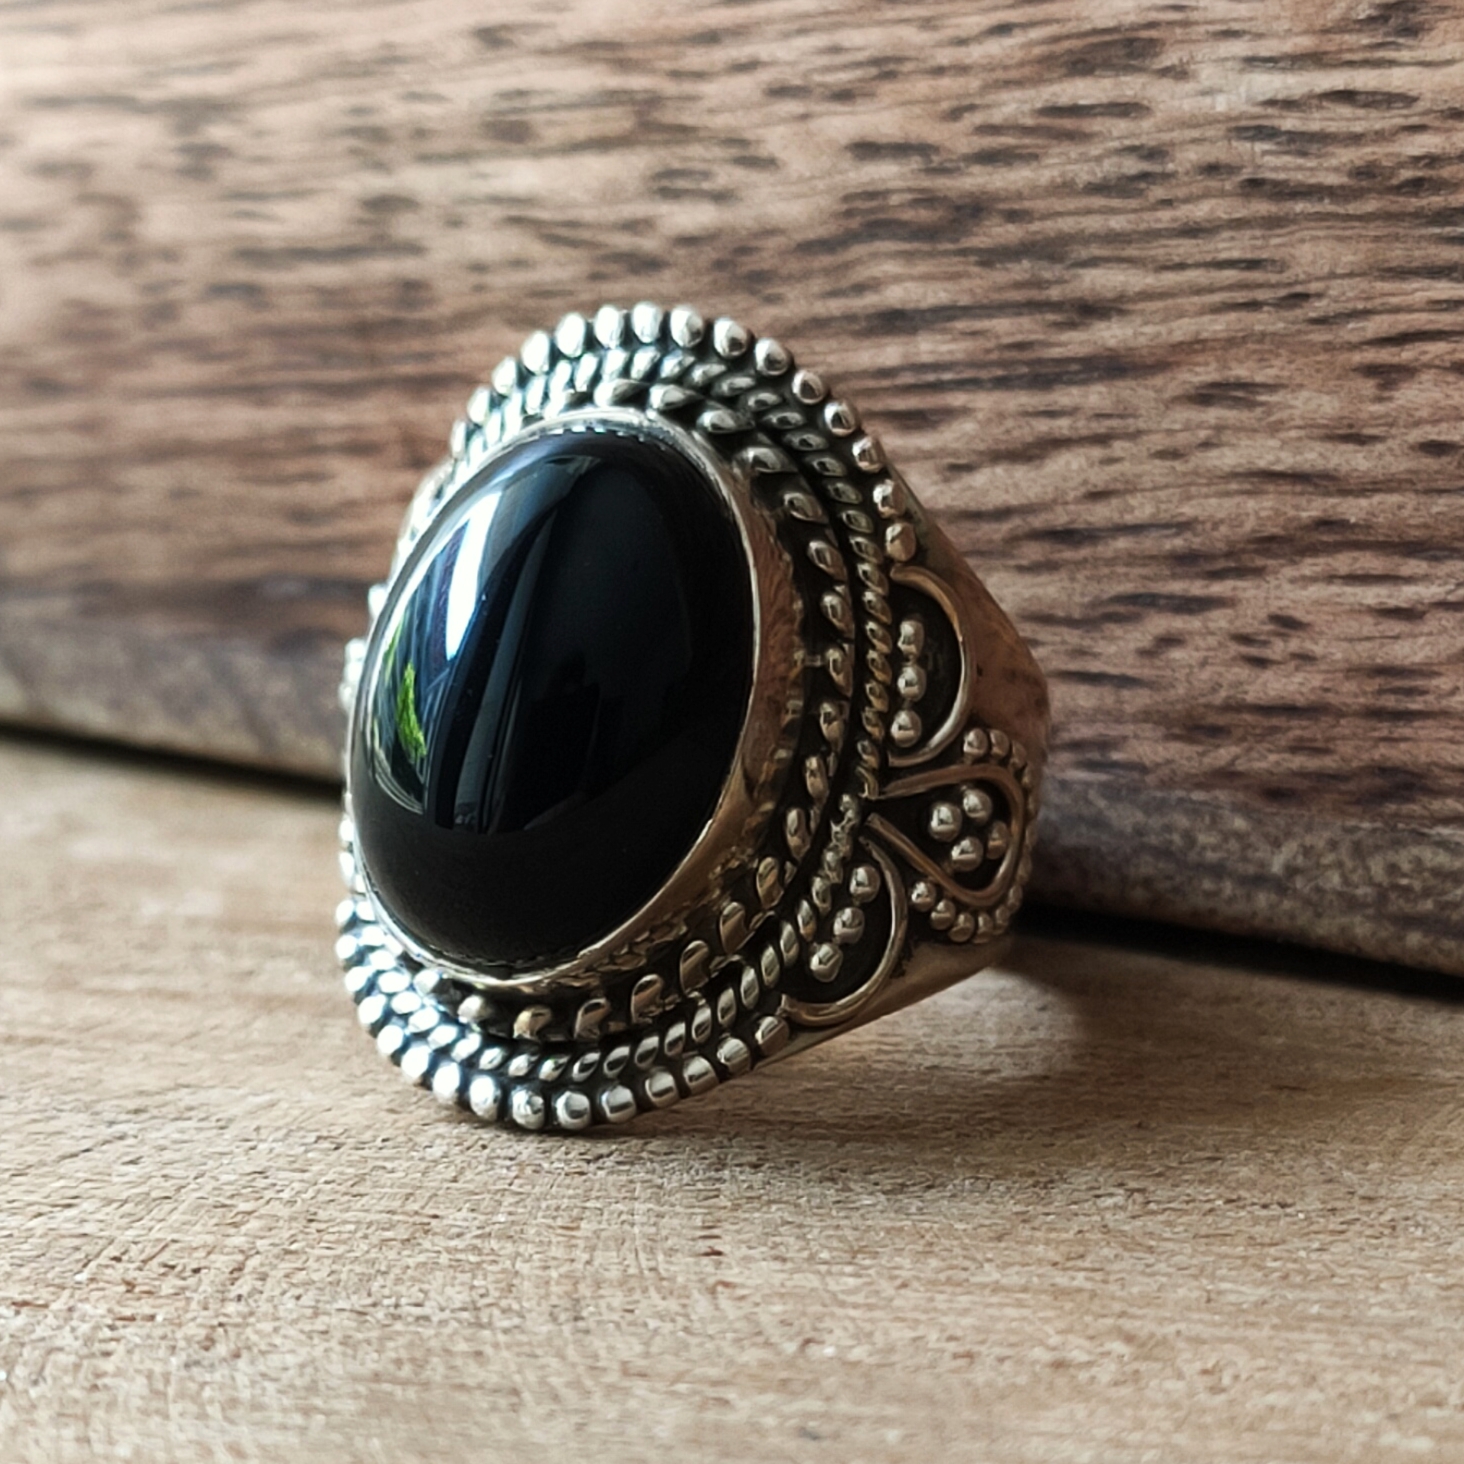 Versnel residentie Grens Ring | Sterling zilver & onyx | maat 16,75 - Of Ais